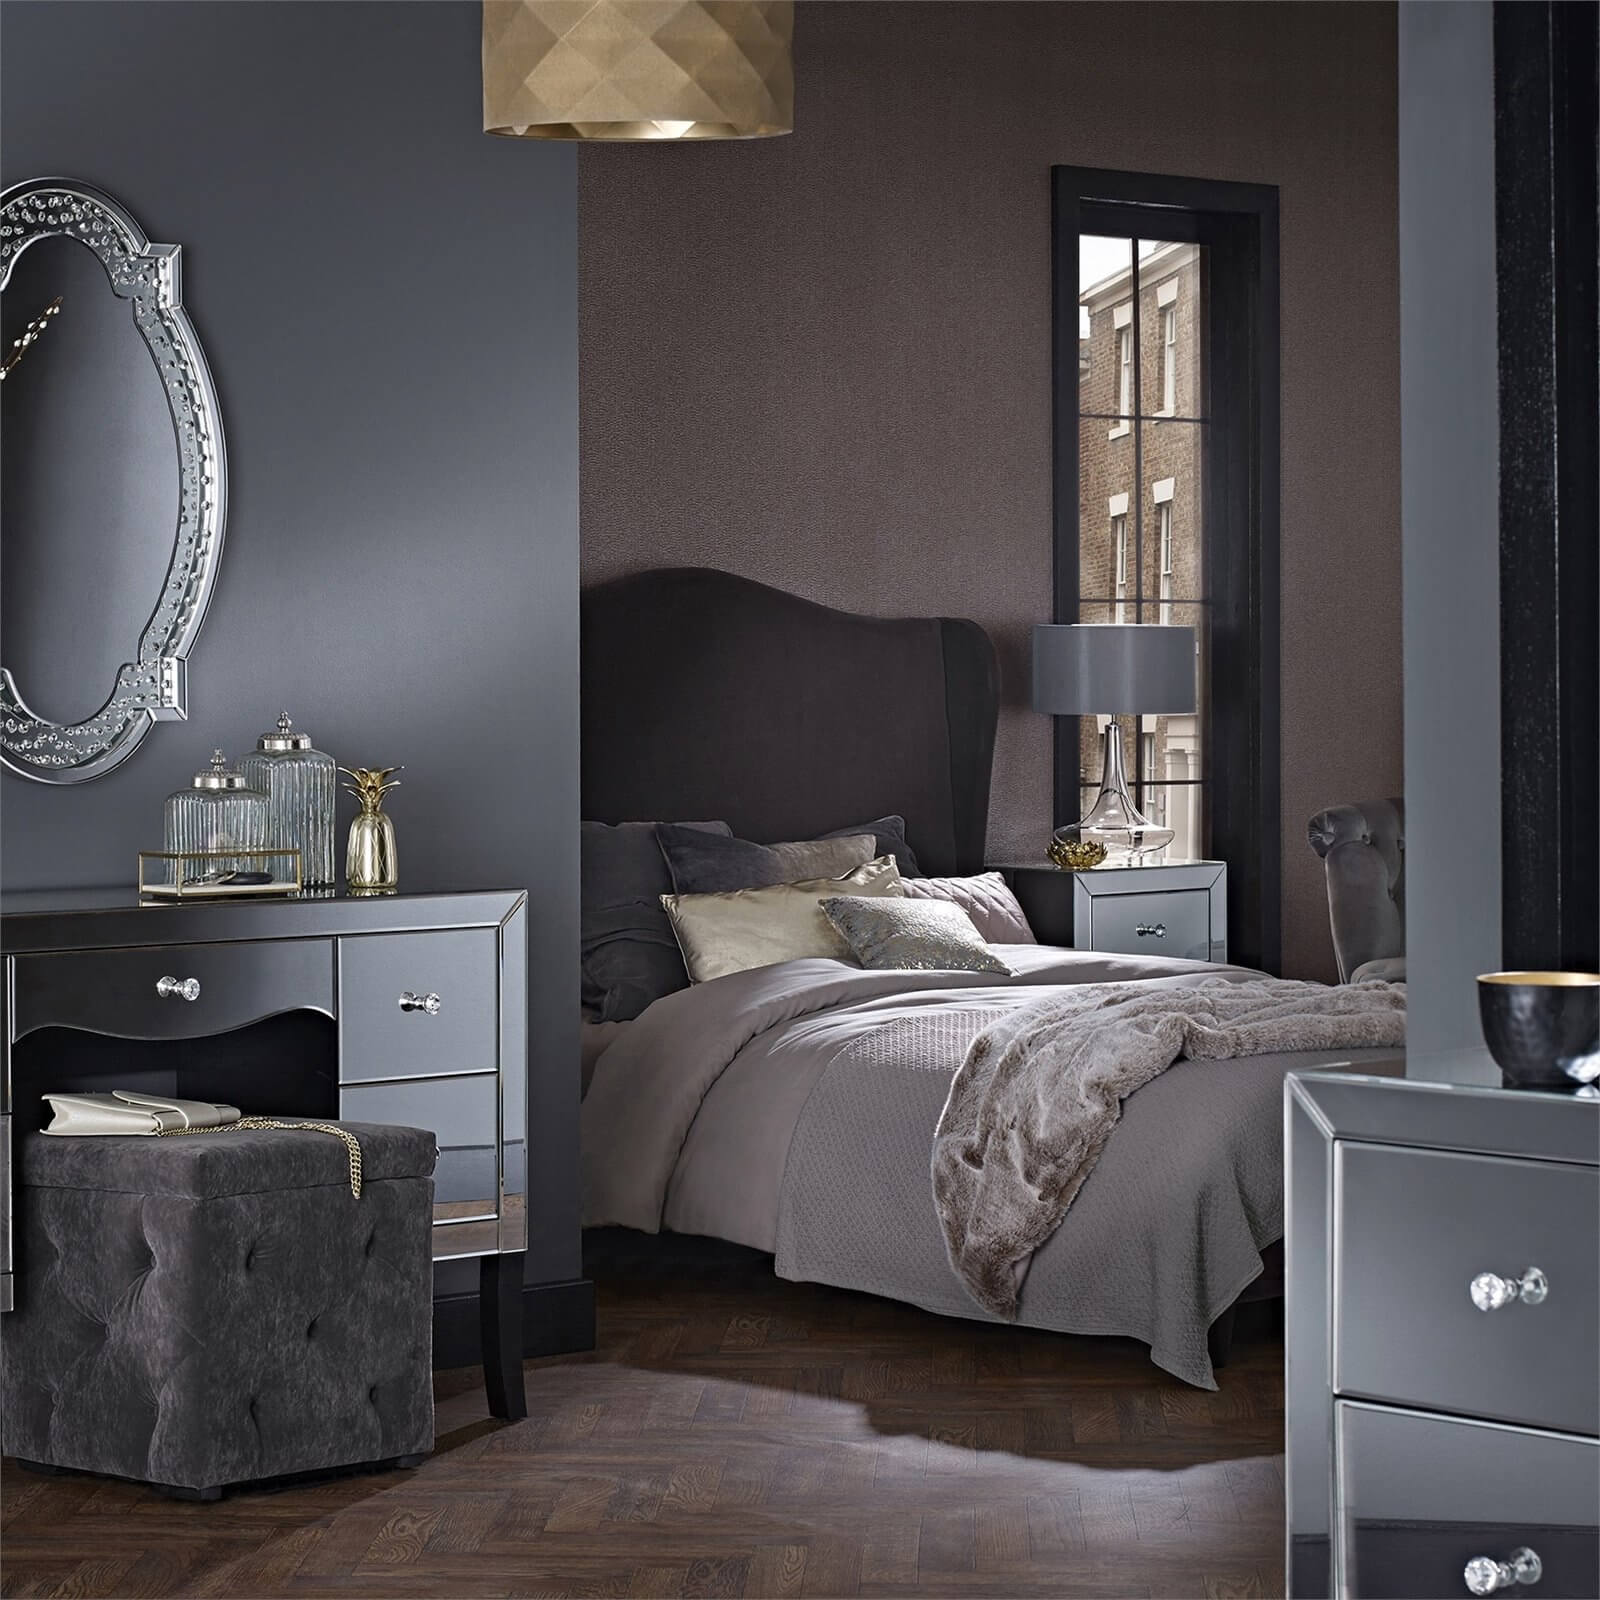 Chateaux Kingsize Bed - Charcoal